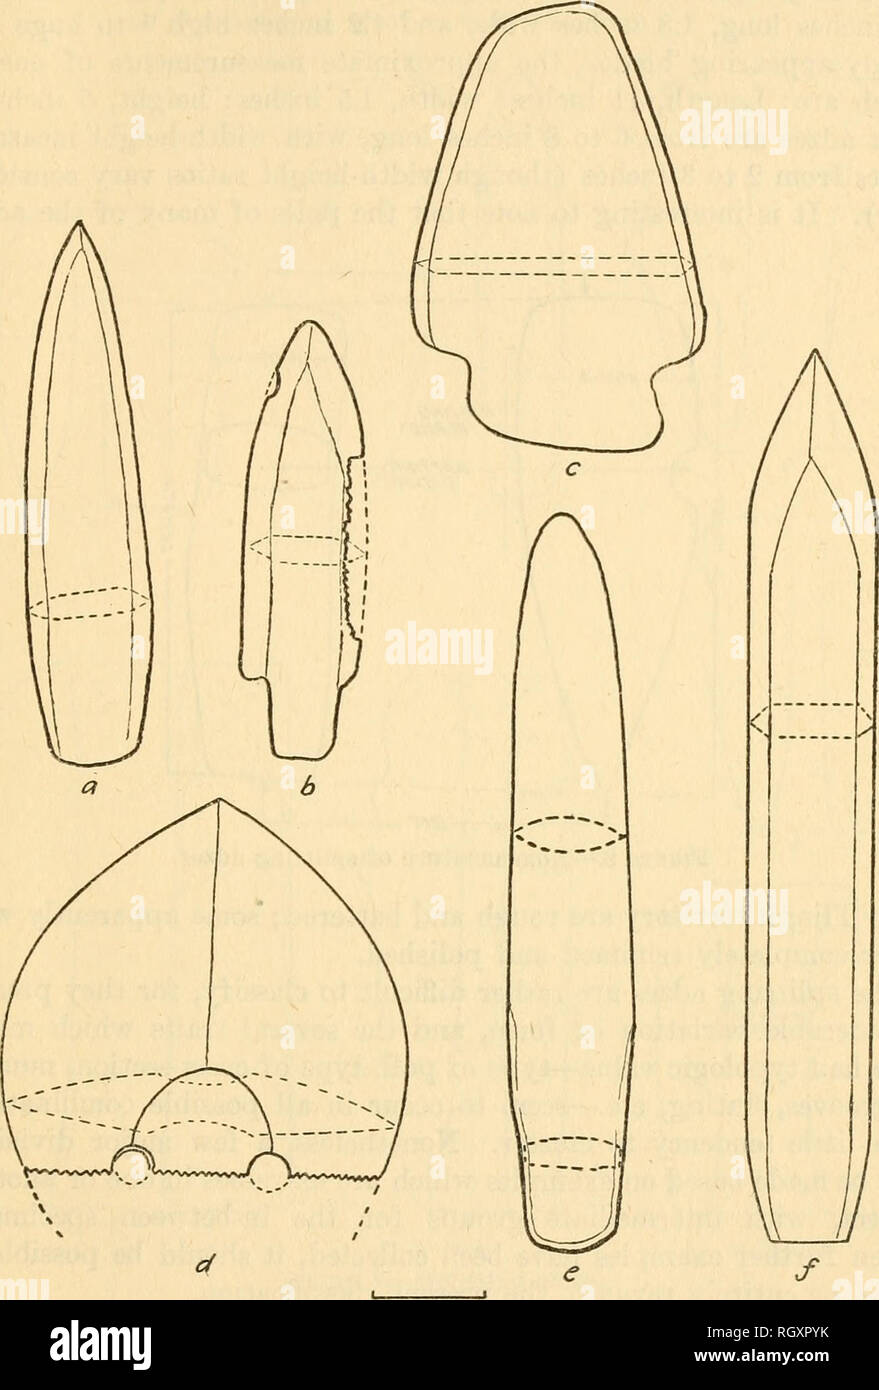 . Bulletin. Ethnology. Anthrop. Pap. No. 20] NORTHERN NW. COAST ARCHEOLOGY—DRUCKER 43 Splitting adzes.—The designation of heavy adze blades modified (usually by a one-quarter groove) for hafting to a T-shaped handle. ONS IhKH Figure 7.—Ground slate points. , Type I (AMNH E/122). Angoon, Alaska. 6, Type I (AMNH E/1803). Sitka, c. Type lA (NMC VII-B-207). N. Saanich. d. Type lA (USNM). SE. Alaska. (Sketch, scale approx.) e. Type II (AMNH B/122). Angoon, Alaska. /=, Type II (PMBC 983). N. Saanich. as &quot;splitting adzes,&quot; in accordance with de Laguna's suggestion (1934, p. 57), is a conven Stock Photo